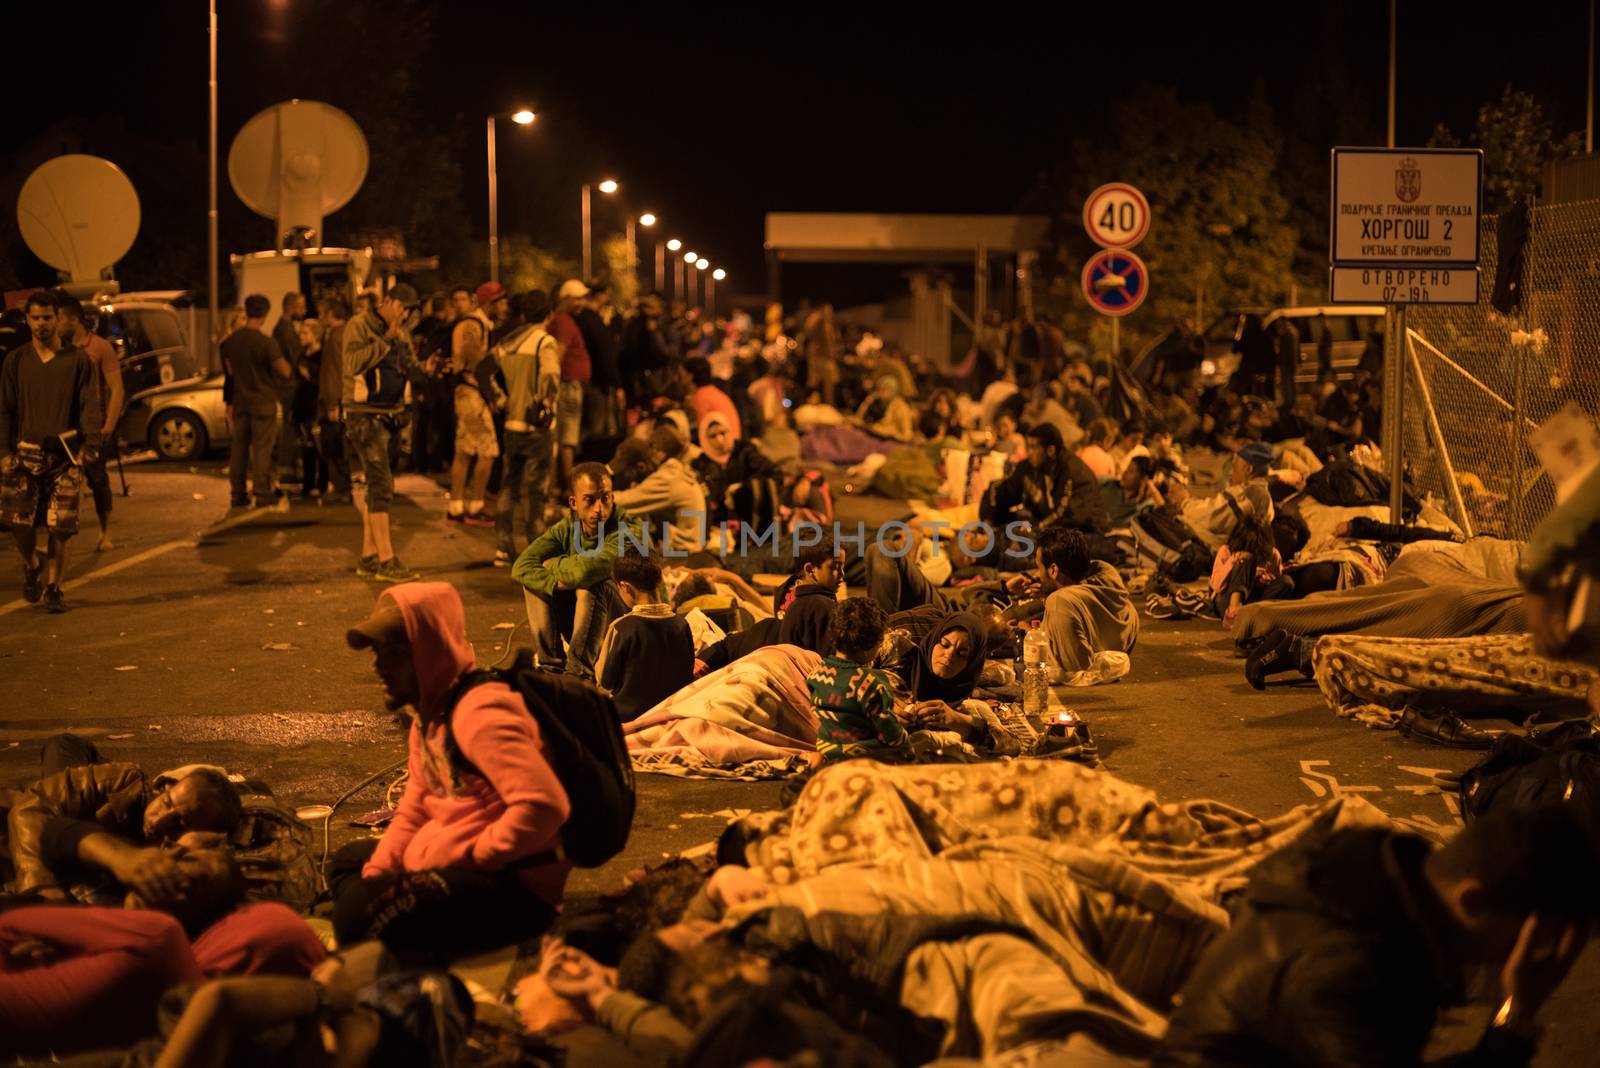 SERBIA, Horgos: Refugees, who wait to cross the border, have set their camp in the Serbian border town of Horgos on September 15, 2015.  